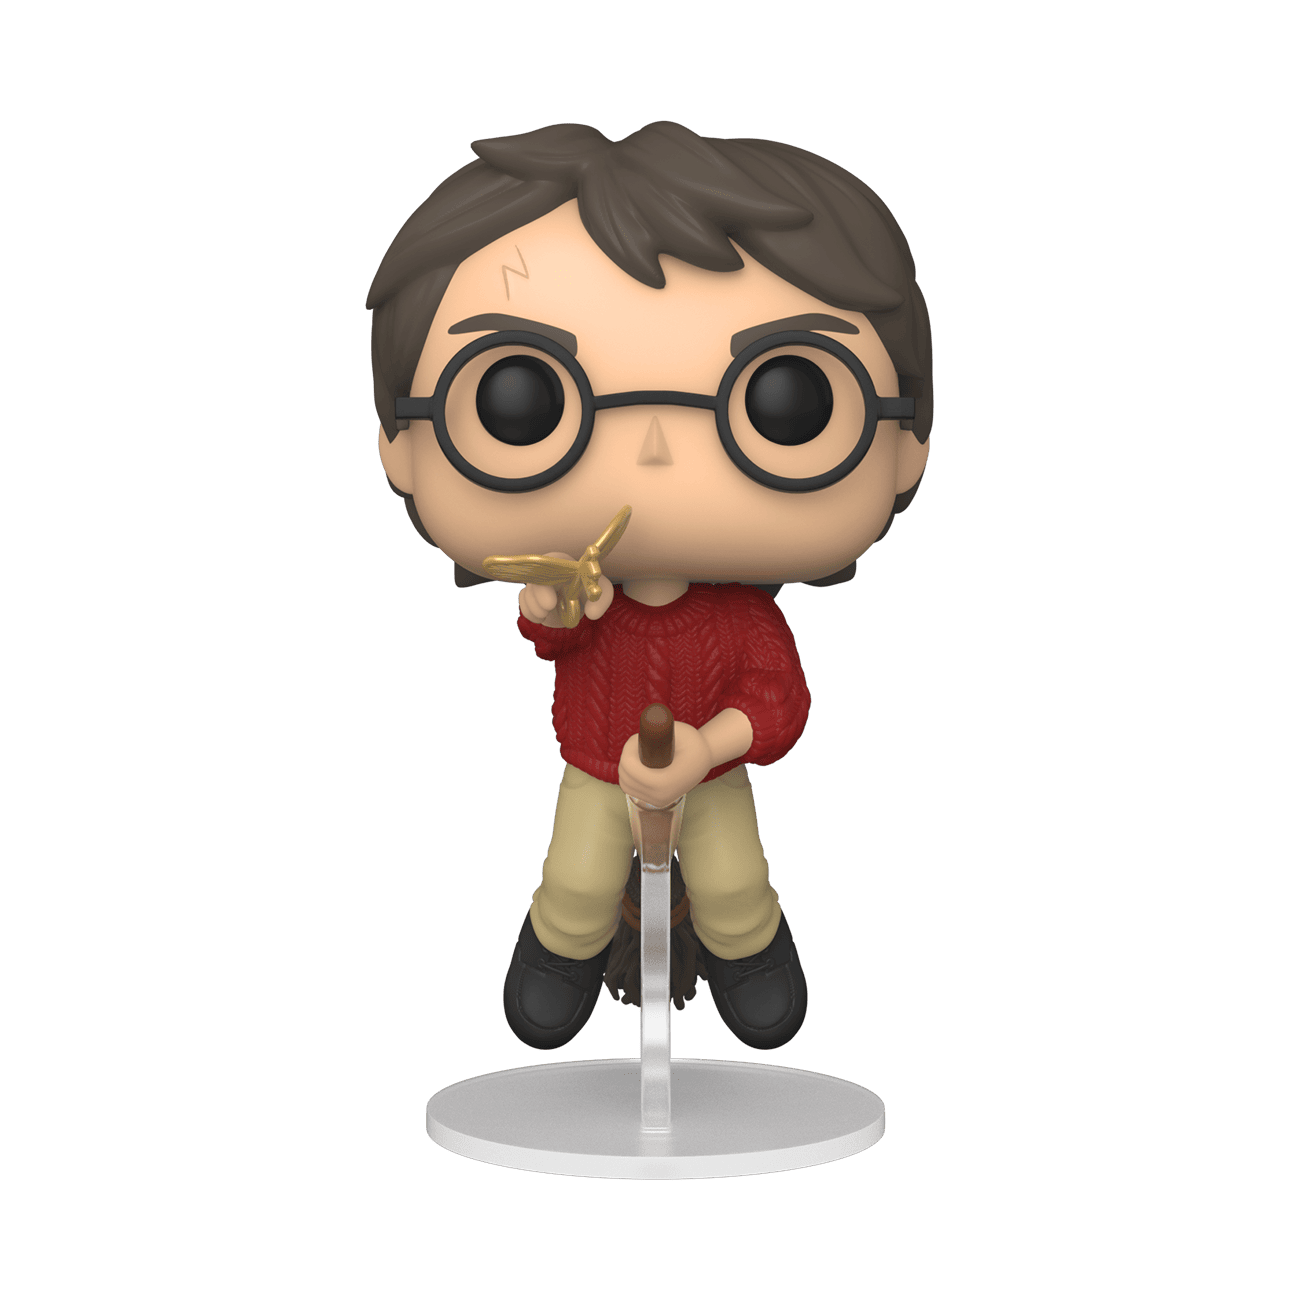 Buy Pop! Harry Potter Flying with Key at Funko.